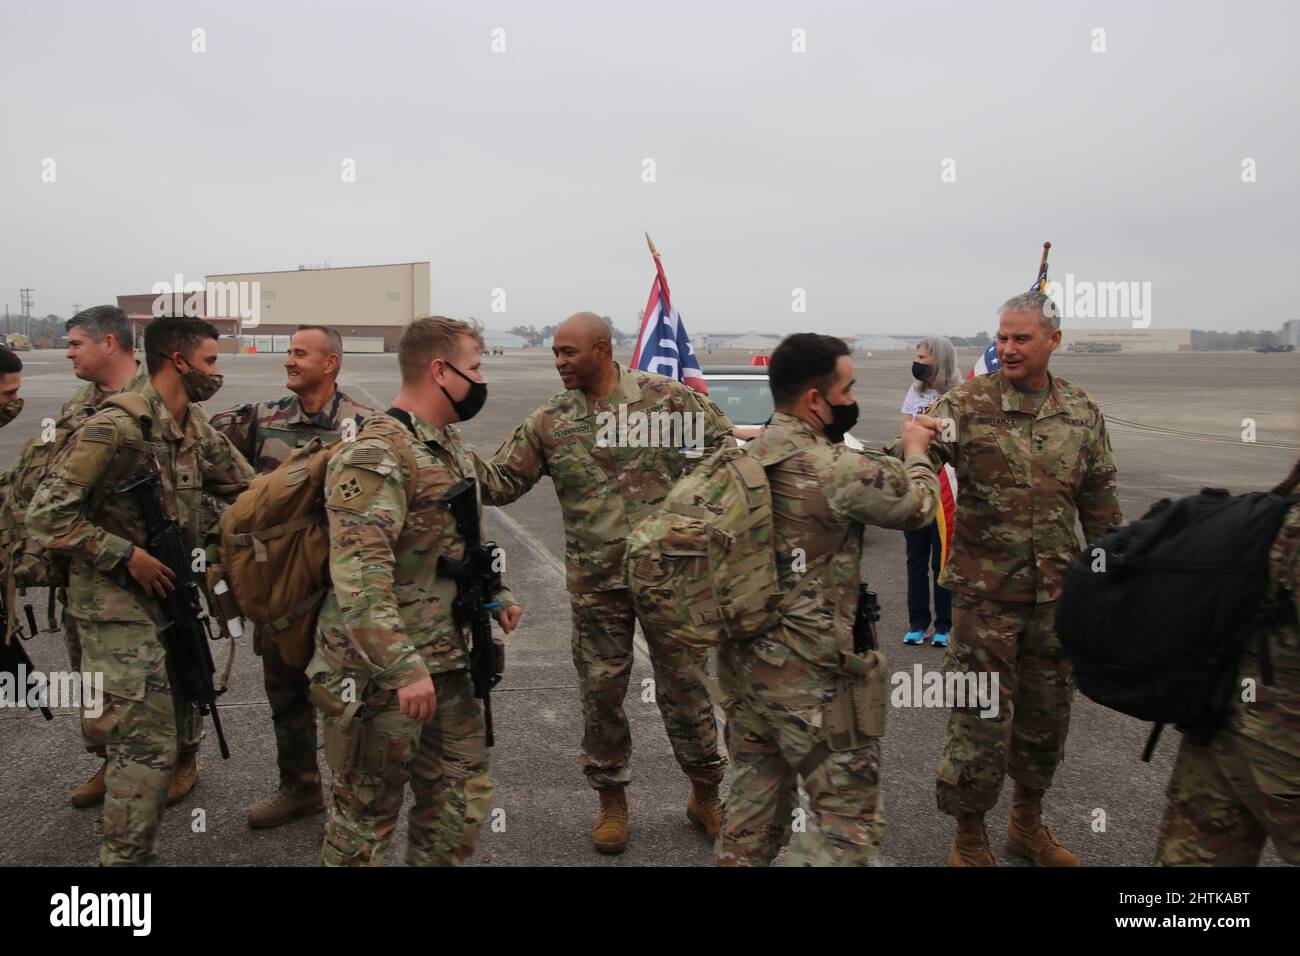 Savannah, United States. 27th Feb, 2022. U.S. Army soldiers, assigned to the 1st Armored Brigade Combat Team, 3rd Infantry Division, are fist bumped by commanding officers as they board a civilian aircraft for deployment to NATO countries from Hunter Army Airfield, February 27, 2022 in Savannah, Georgia. The soldiers are deploying to Eastern Europe in support of NATO allies and deter Russian aggression toward Ukraine. Credit: Capt. John D. Howard Jr/U.S Army/Alamy Live News Stock Photo